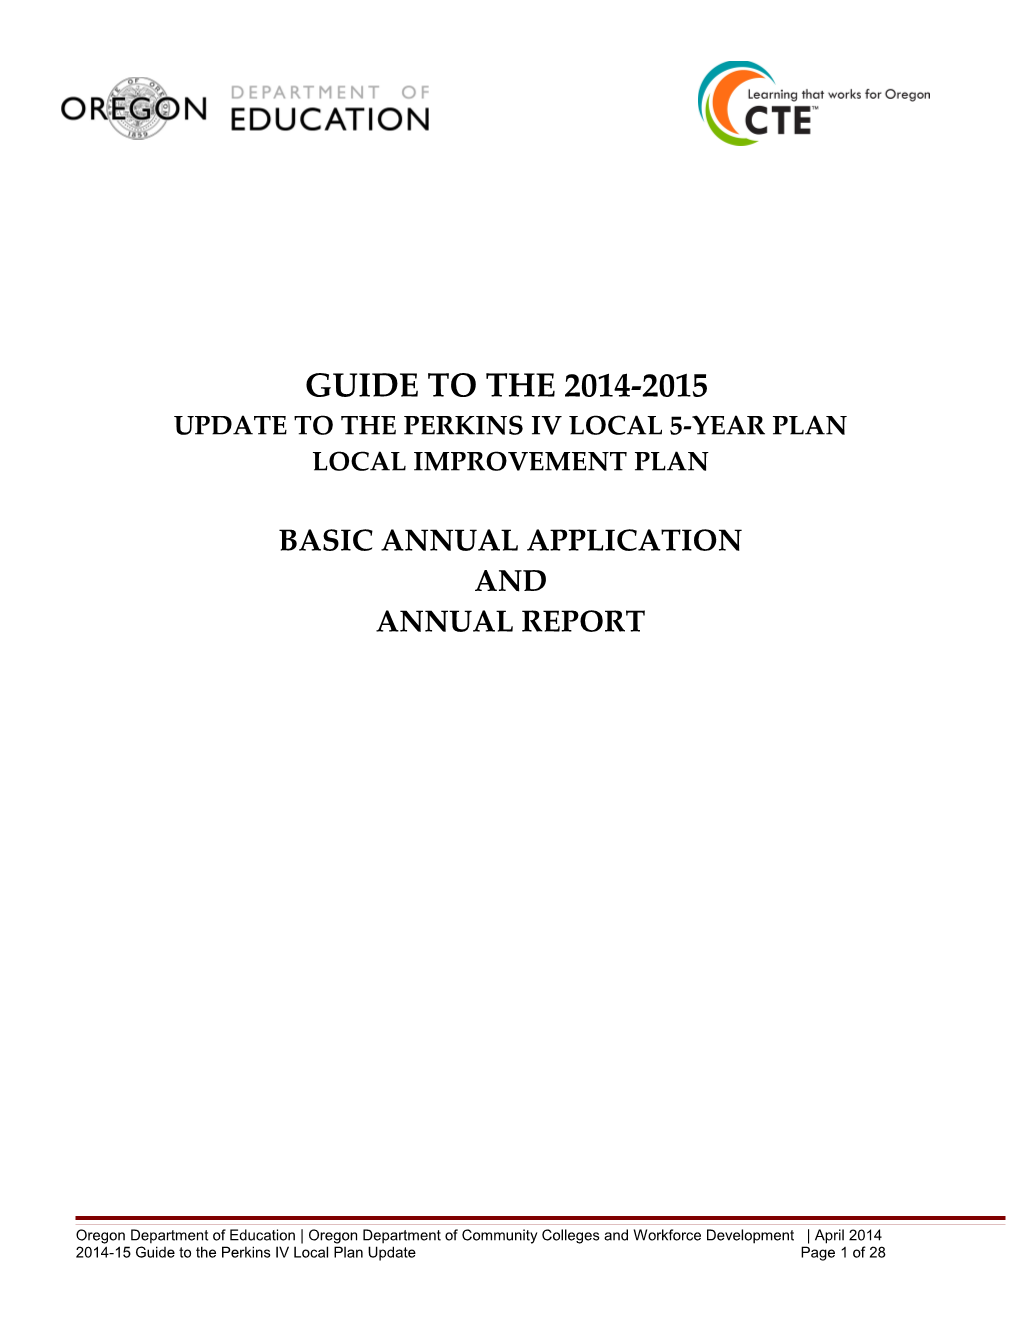 Update to the Perkins Iv Local 5-Year Plan